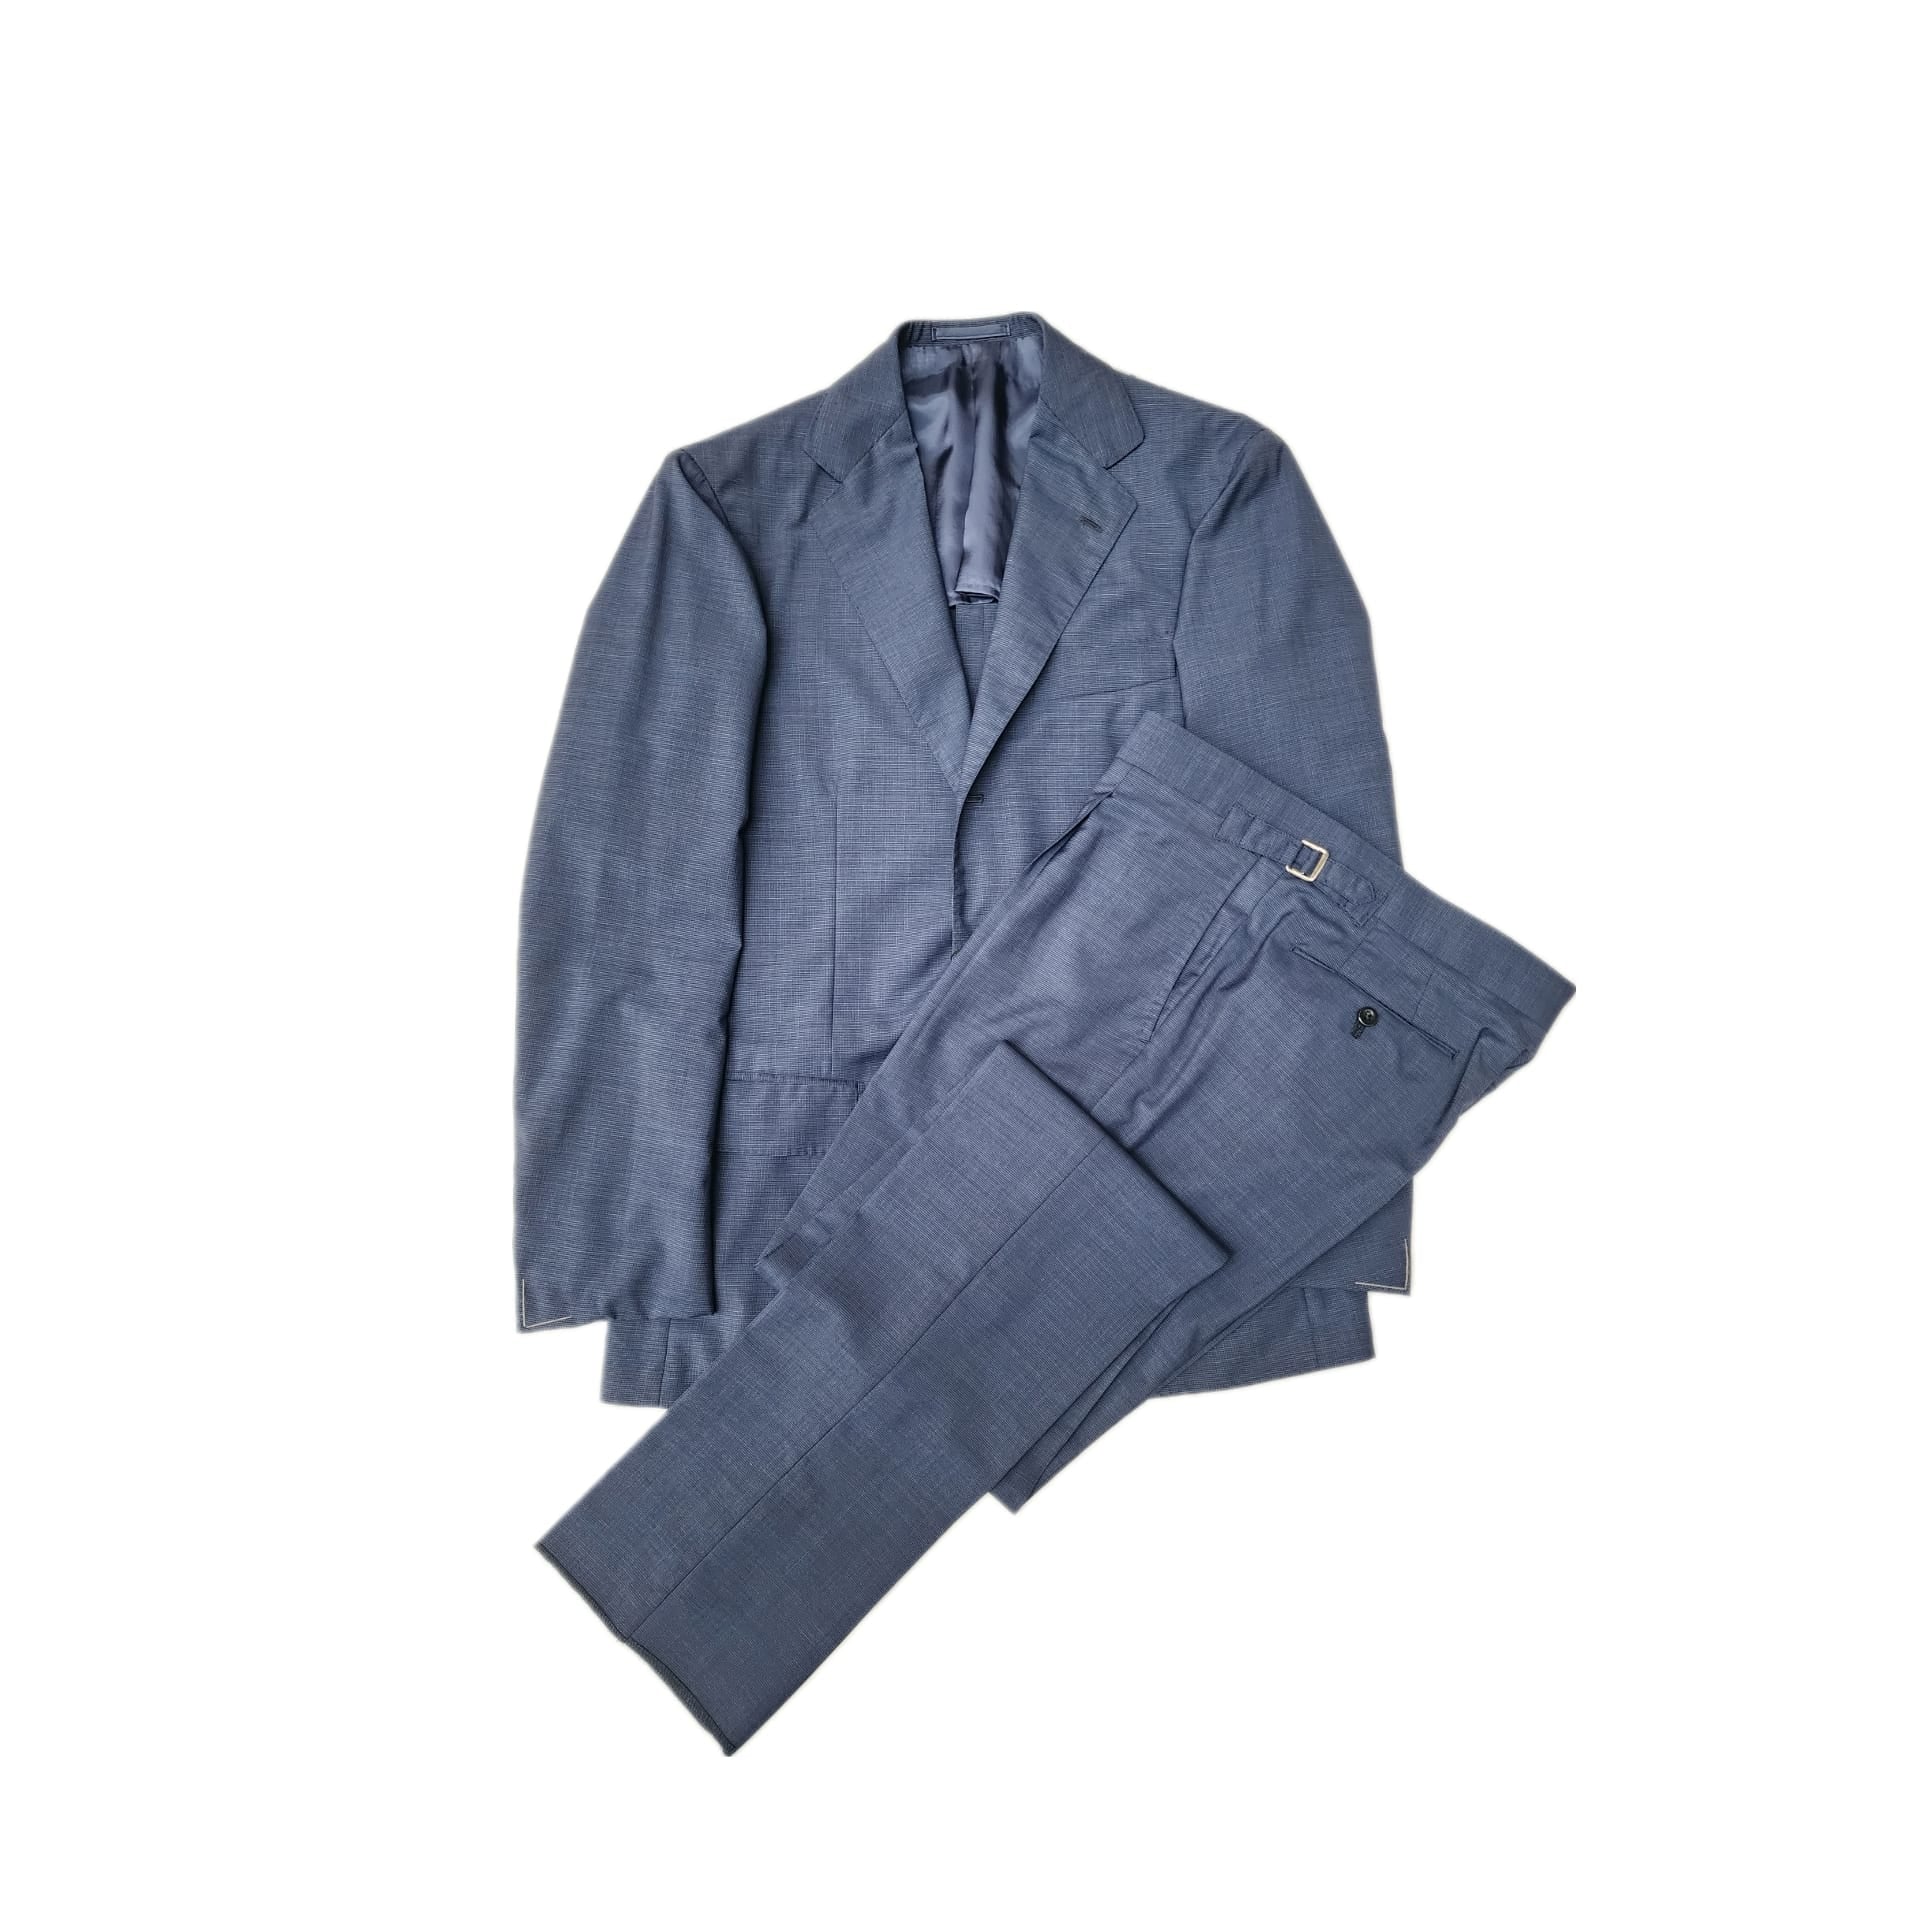 RING JACKET / BLUE SUIT (RT023S10X)